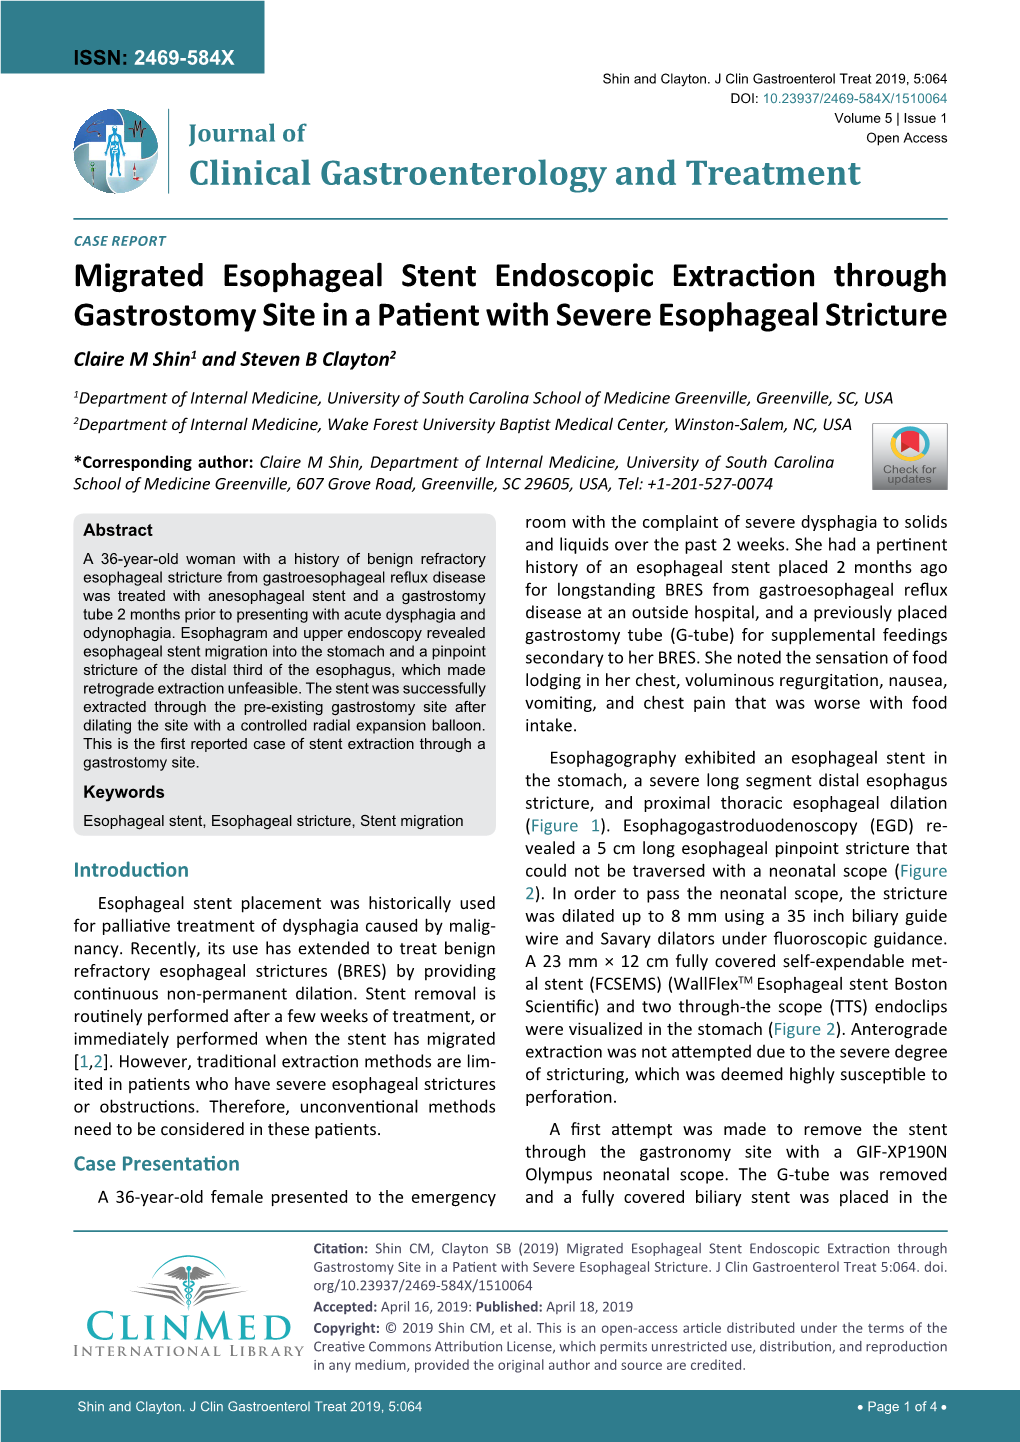 Migrated Esophageal Stent Endoscopic Extraction Through Gastrostomy Site in a Patient with Severe Esophageal Stricture Claire M Shin1 and Steven B Clayton2